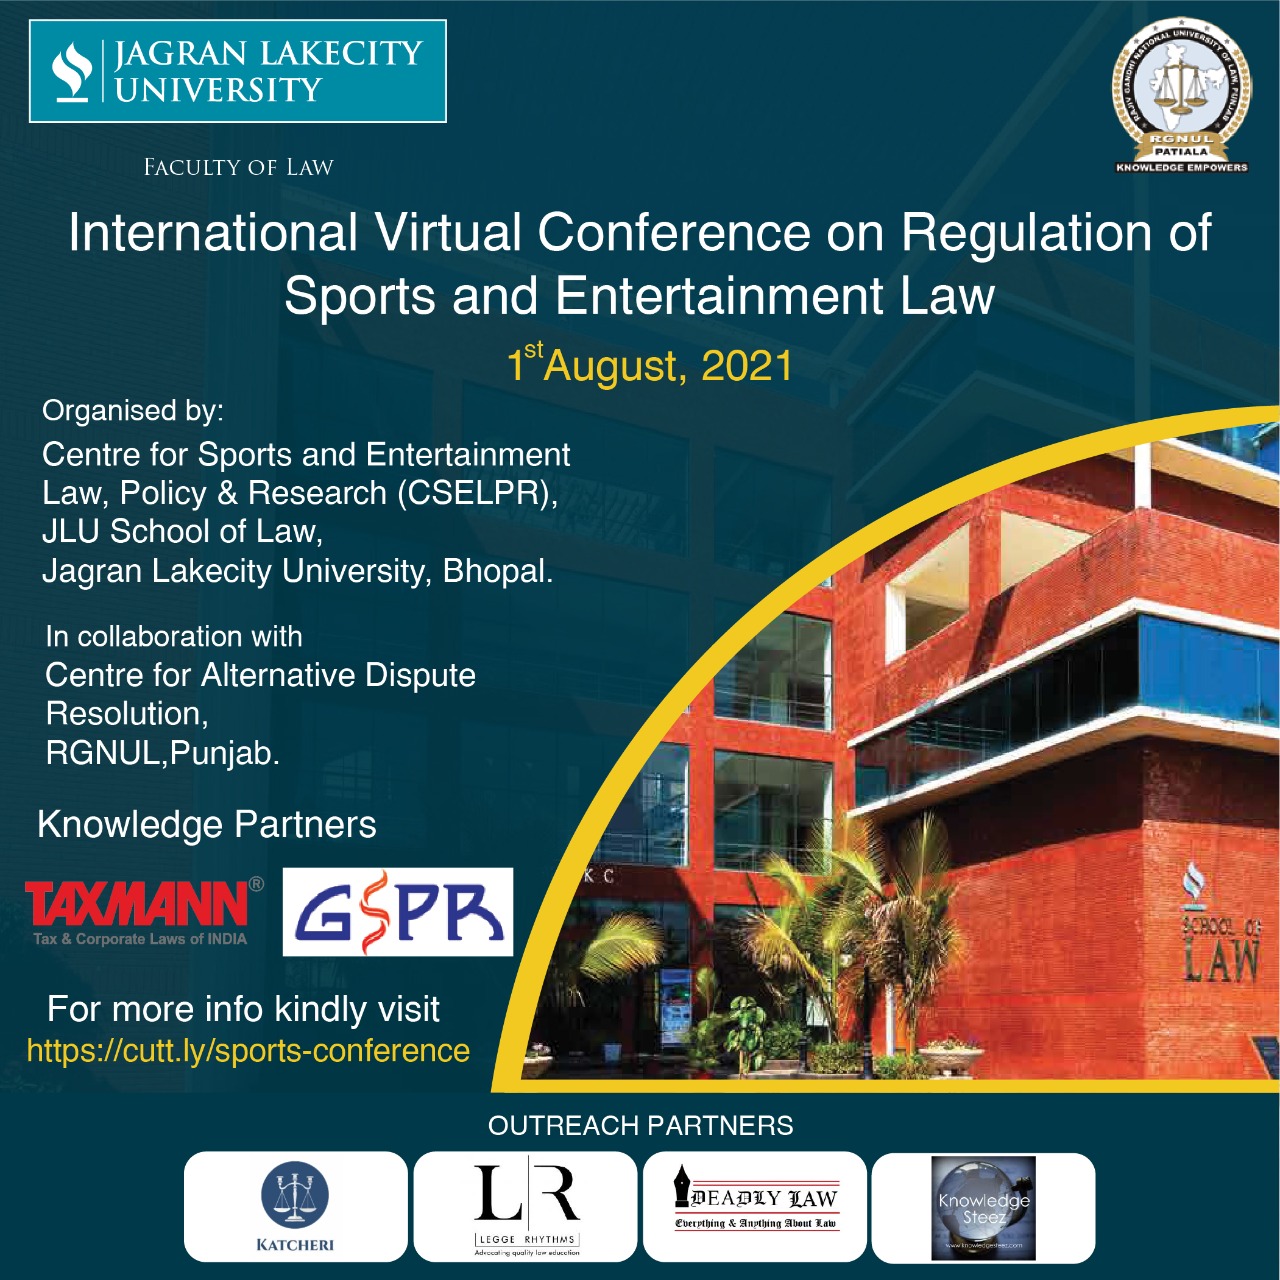 International Virtual Conference on the regulation of sports and entertainment law